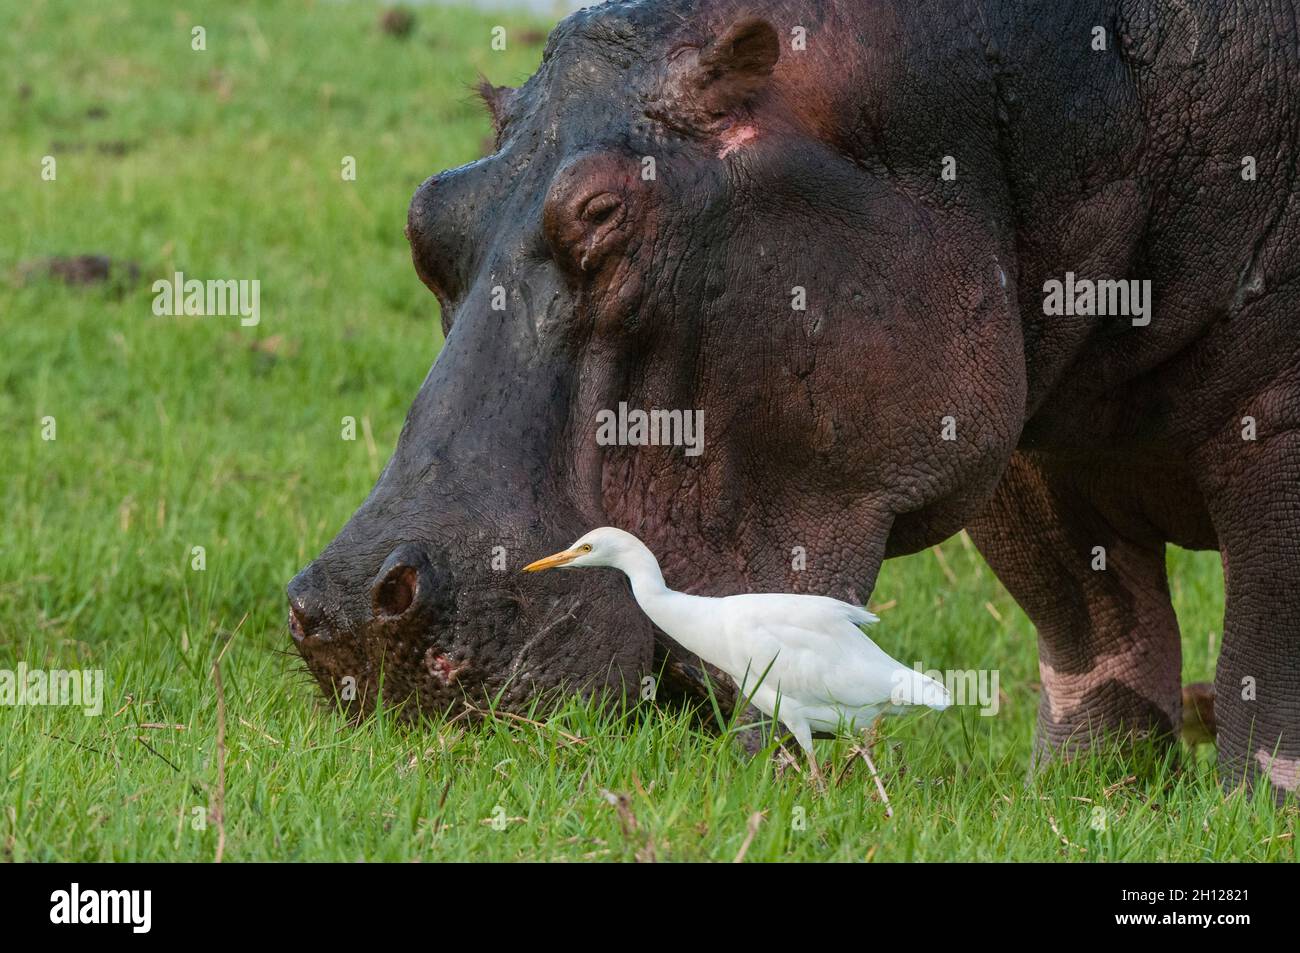 A cattle egret, Bubulcus ibis, catching insects that a grazing hippopotamus stirs up. Chobe National Park, Botswana. Stock Photo